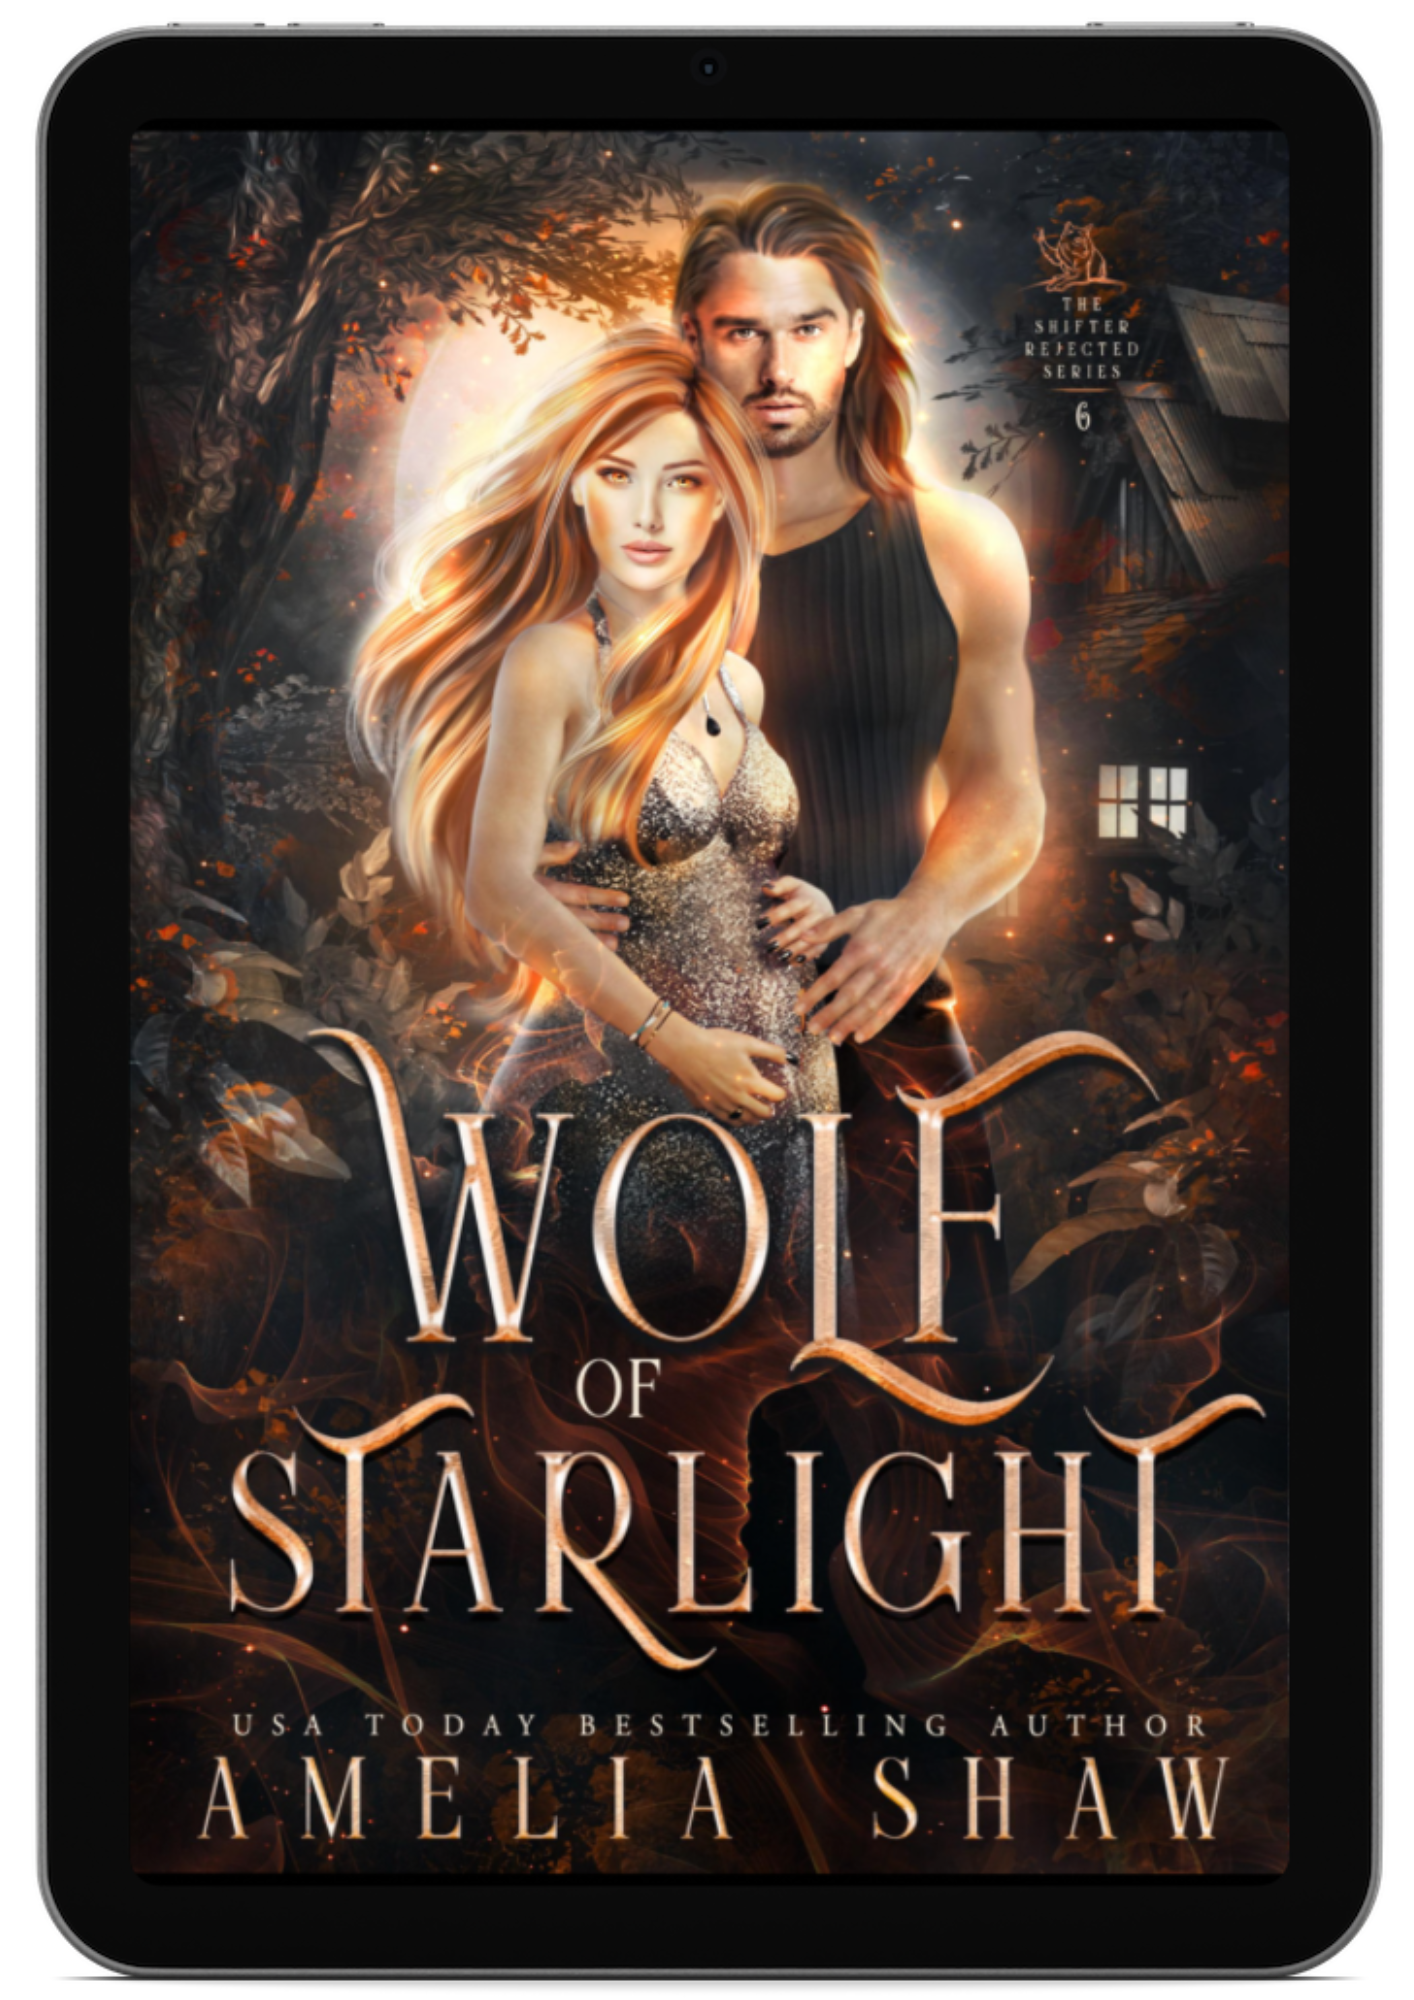 Wolf of Startlight | Book 6 - The Shifter Rejected